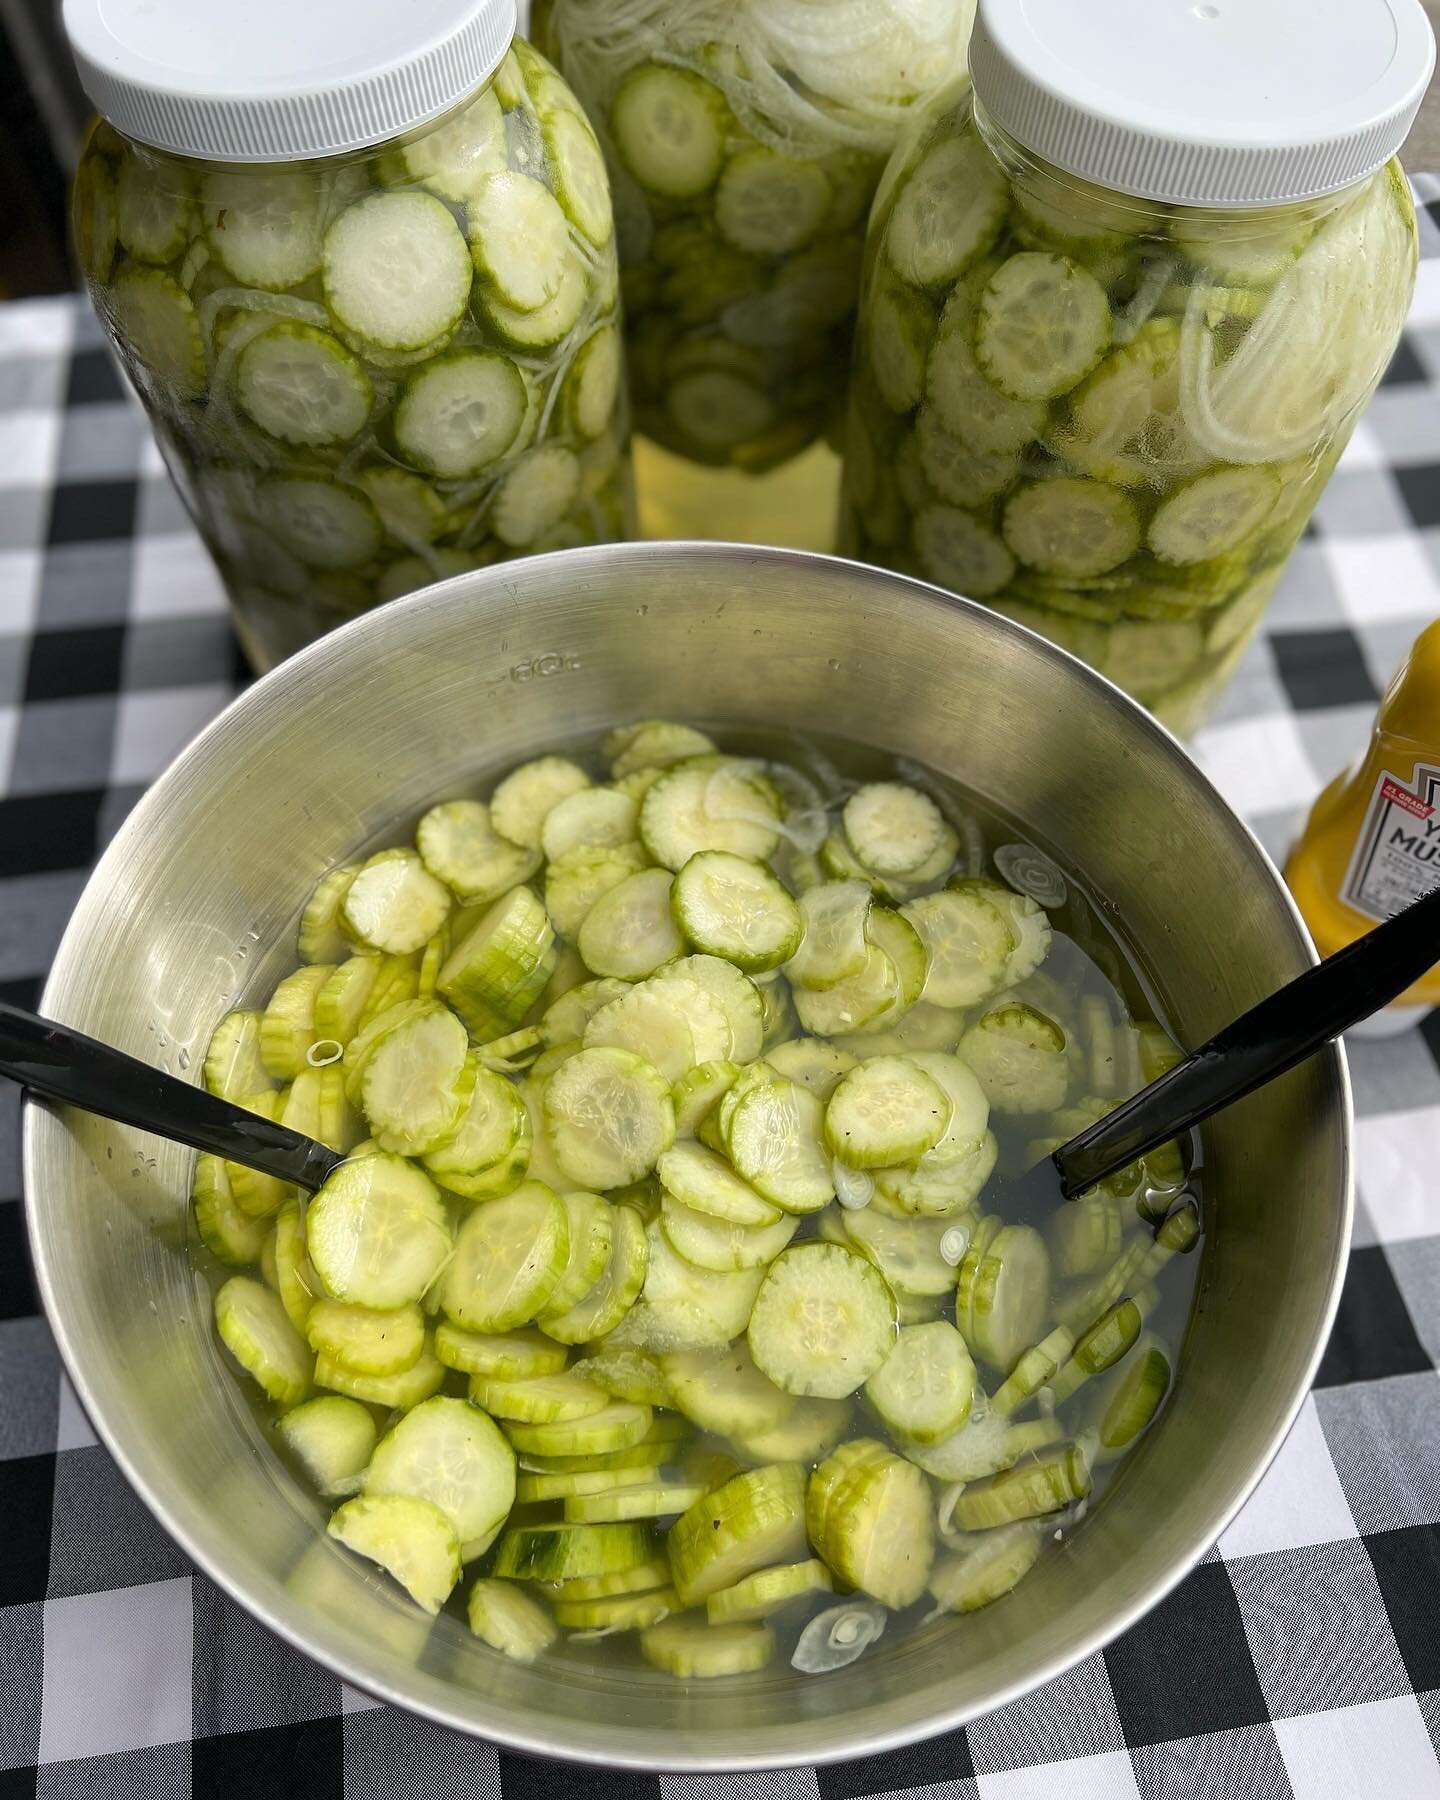 The perfect side for pulled pork:  Texas Cucumber Salad.

We make our homemade cucumber salad for each event using a old family recipe.  Always a hit! 

#texaspigroaster